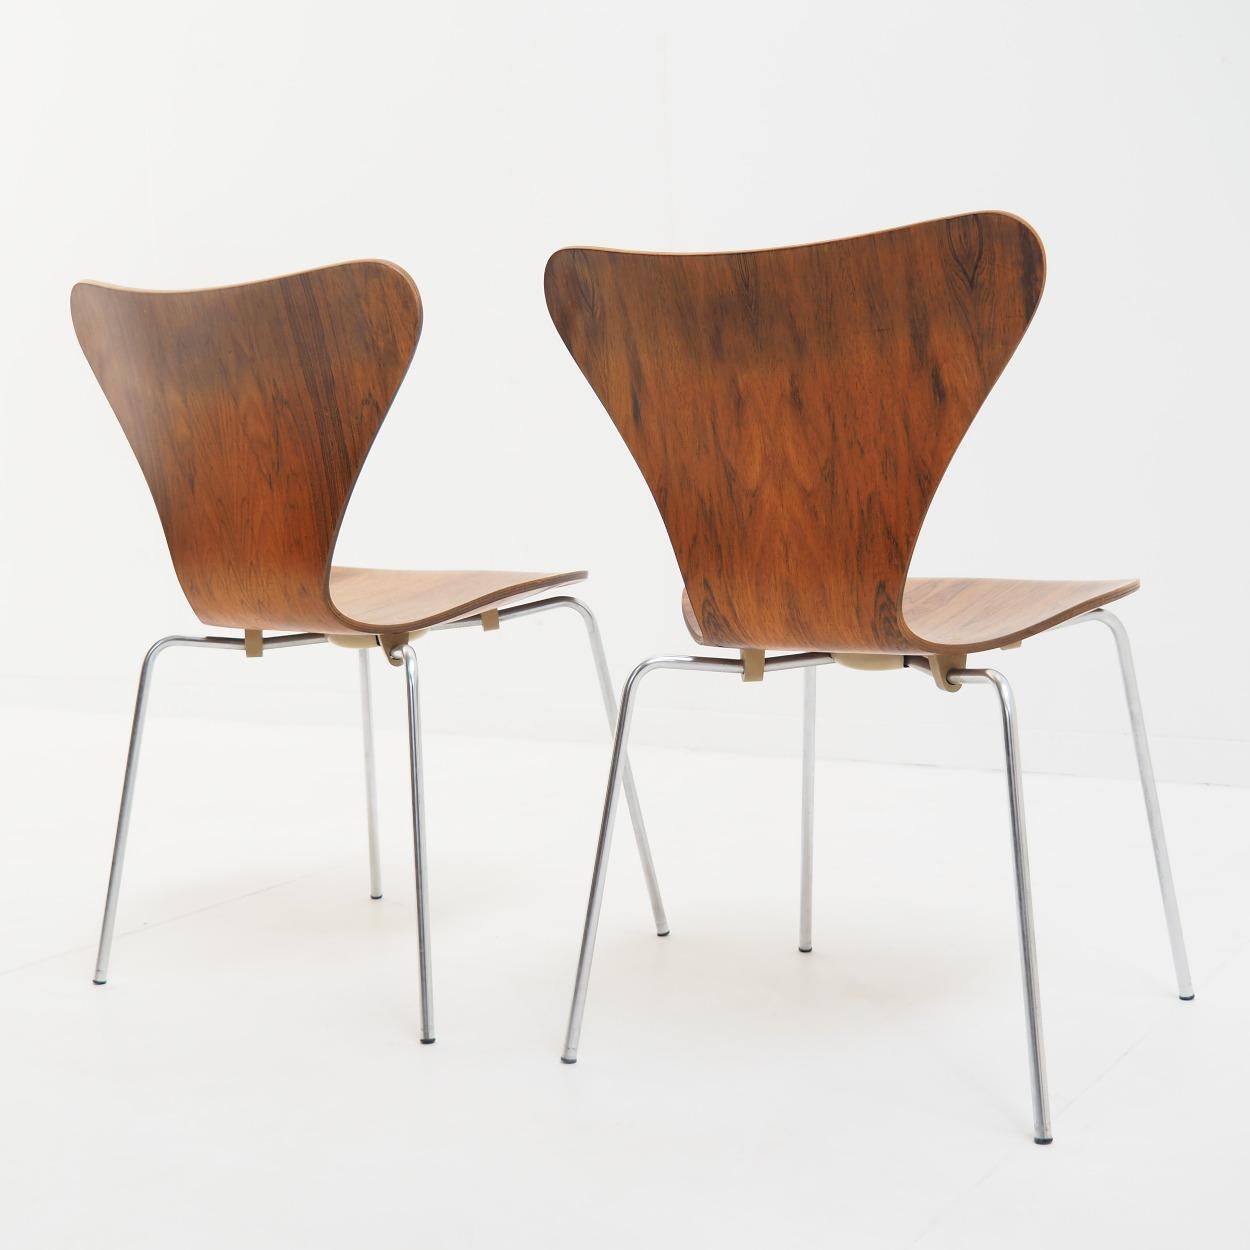 Late 20th Century Set of 2 Model No. 3107 Chairs by Arne Jacobsen for Fritz Hansen, Rosewood, 1970 For Sale